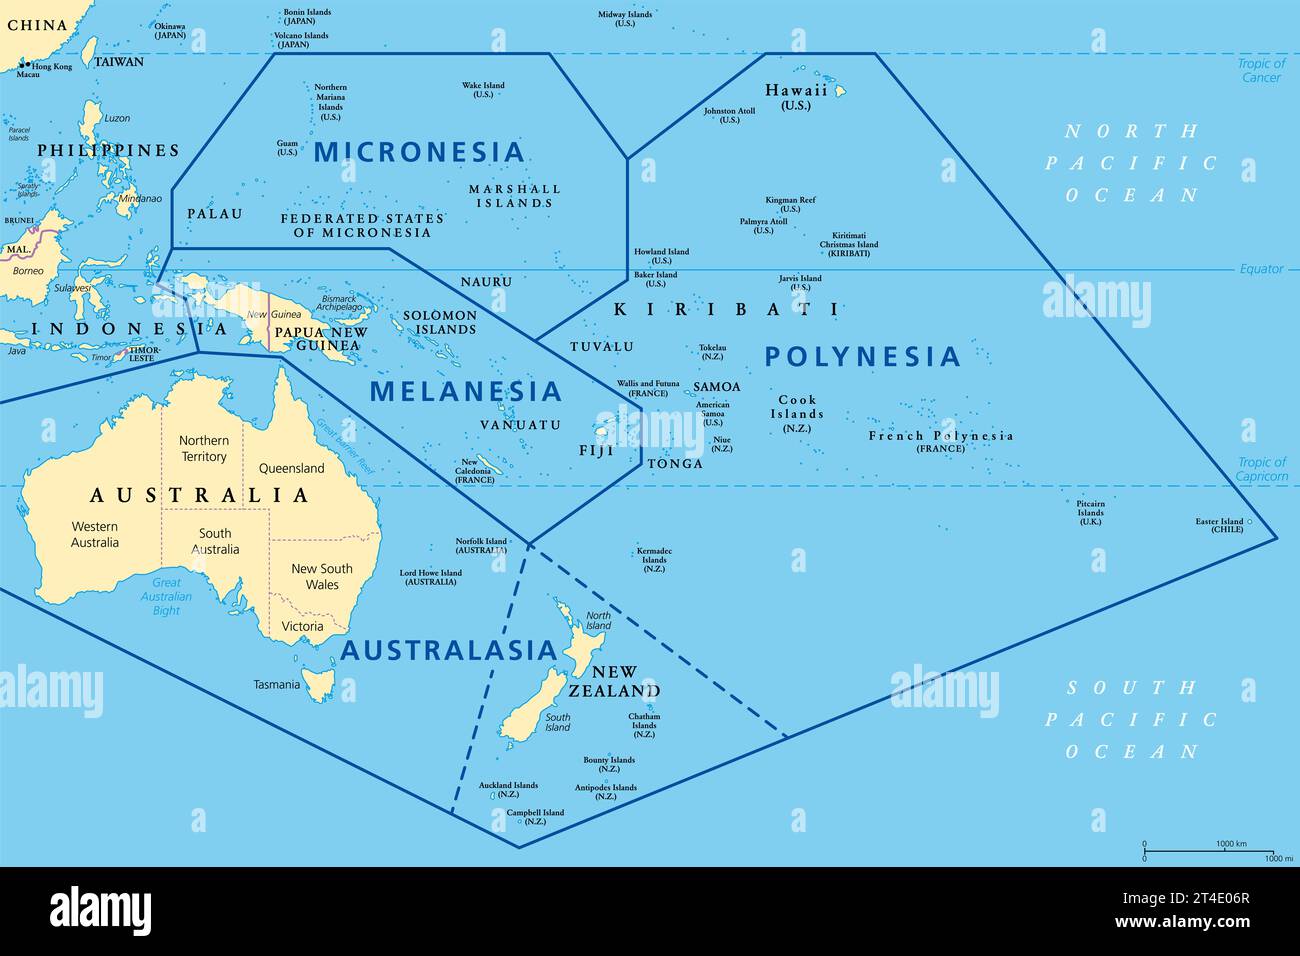 Subregions of Oceania, political map. Geoscheme with regions in the Pacific Ocean and next to Asia. Melanesia, Micronesia, Polynesia, and Australasia. Stock Photo